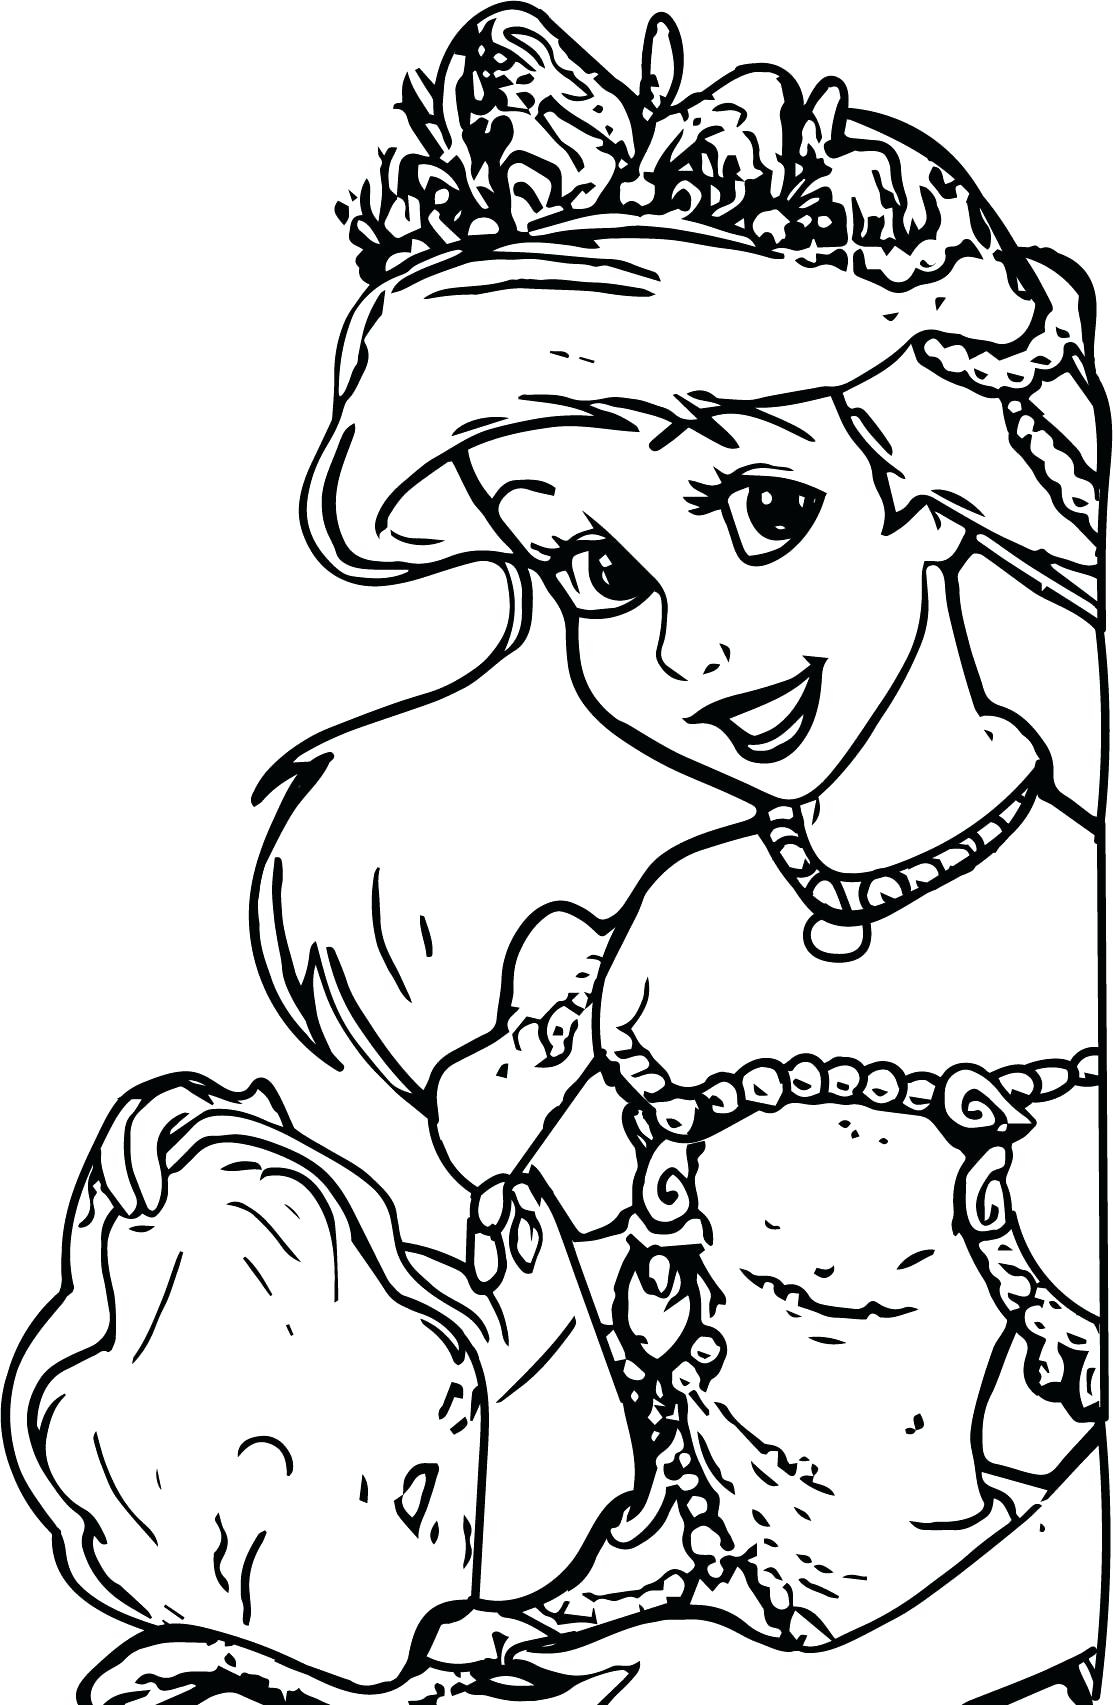 Human Coloring Pages at GetColorings.com | Free printable ...